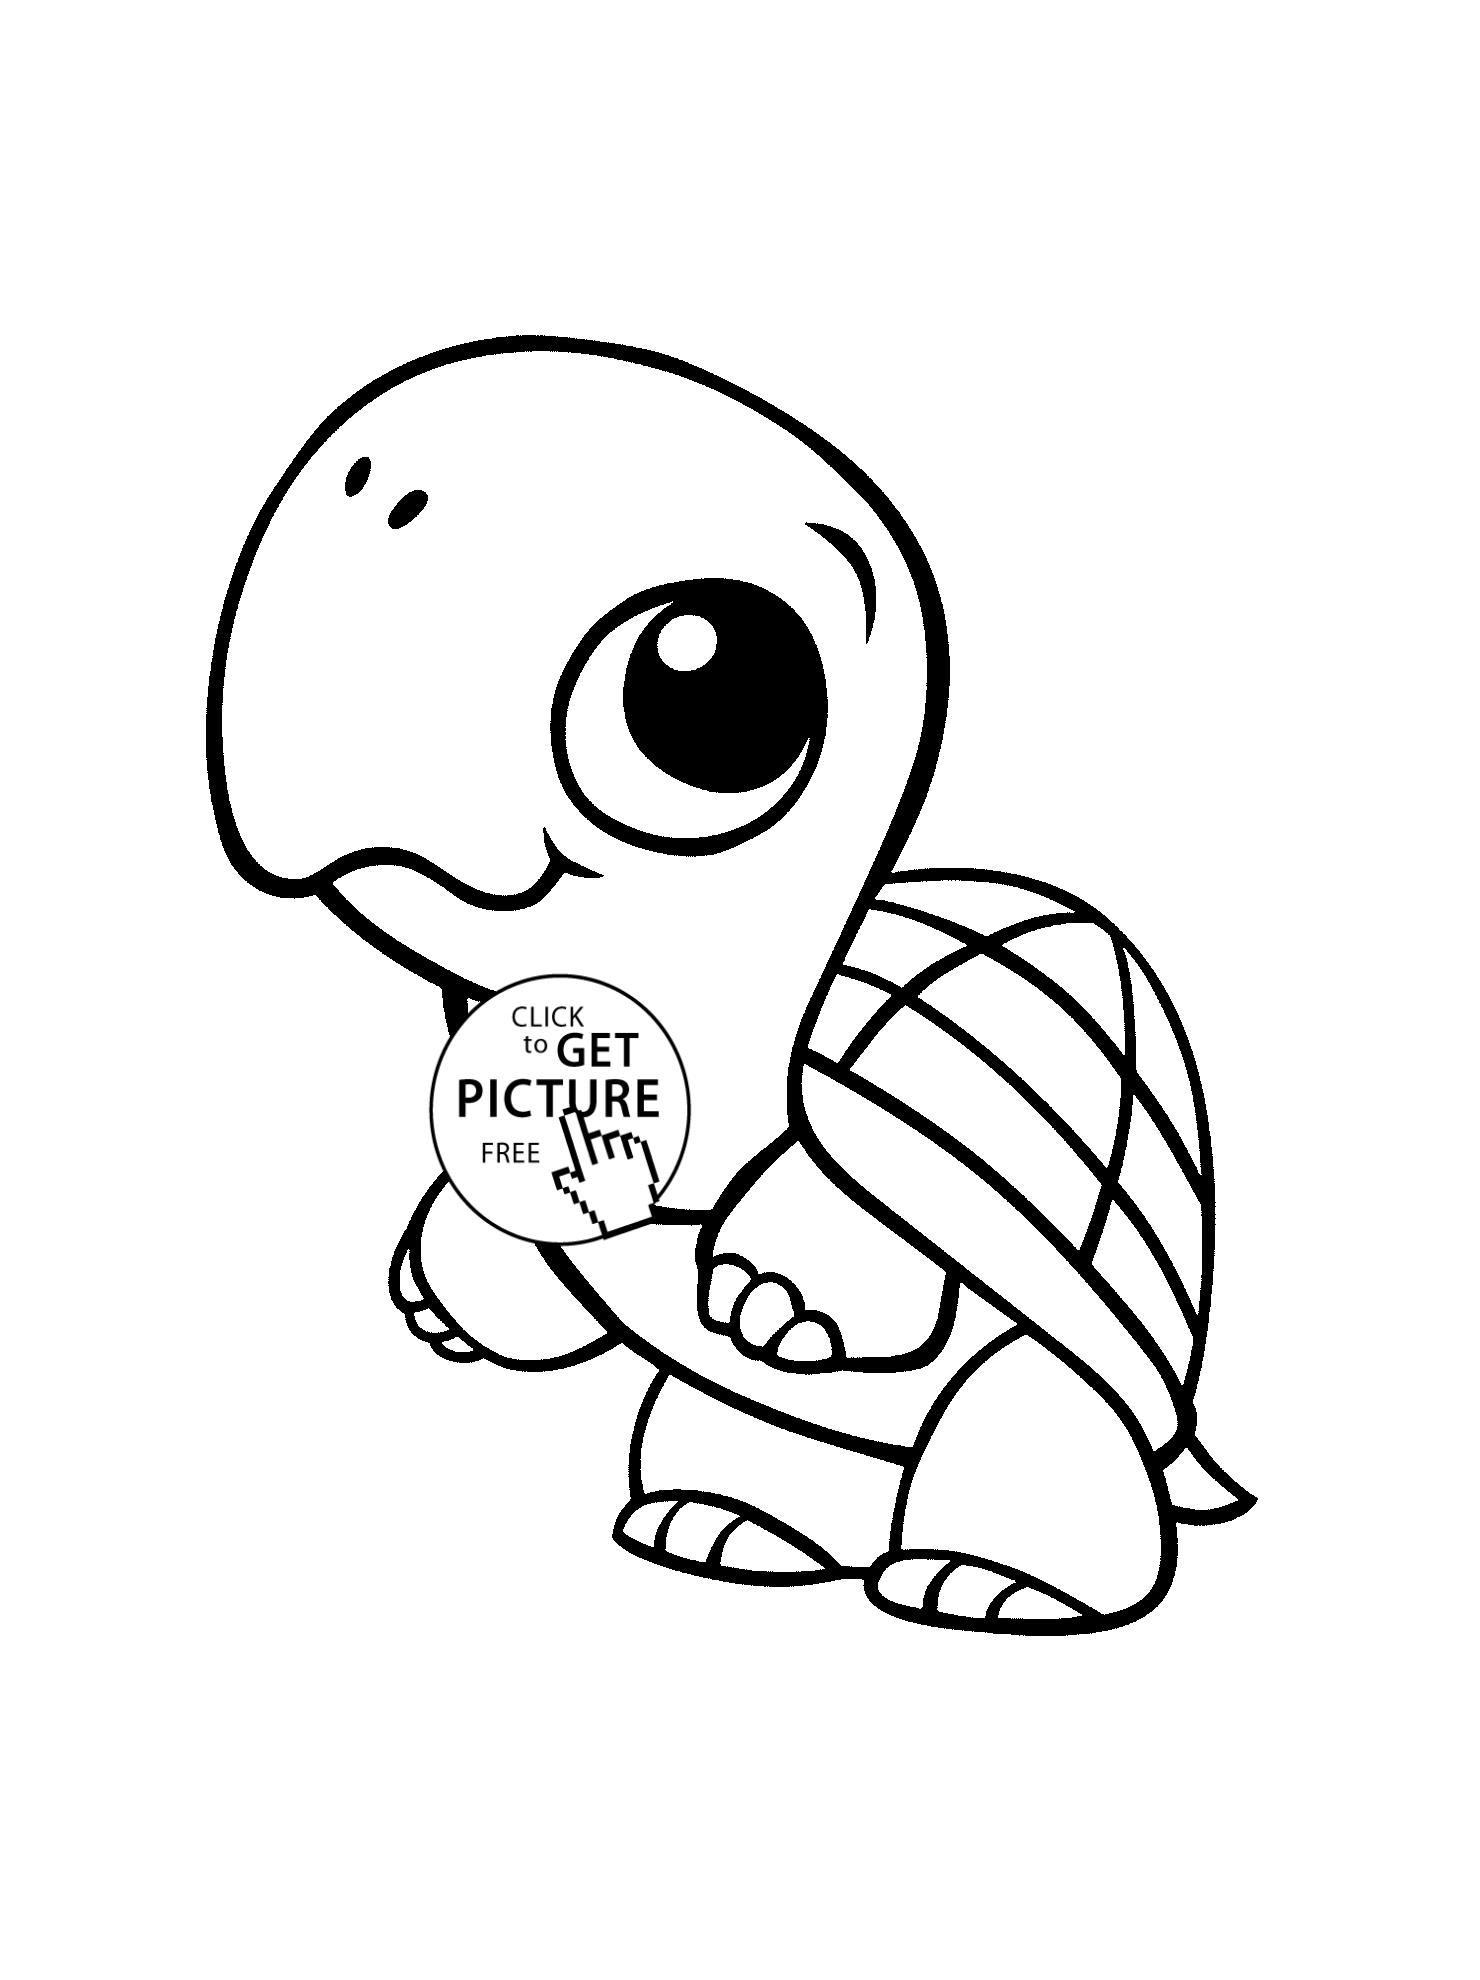 Baby Turtle animal coloring page for kids, baby animal coloring ...